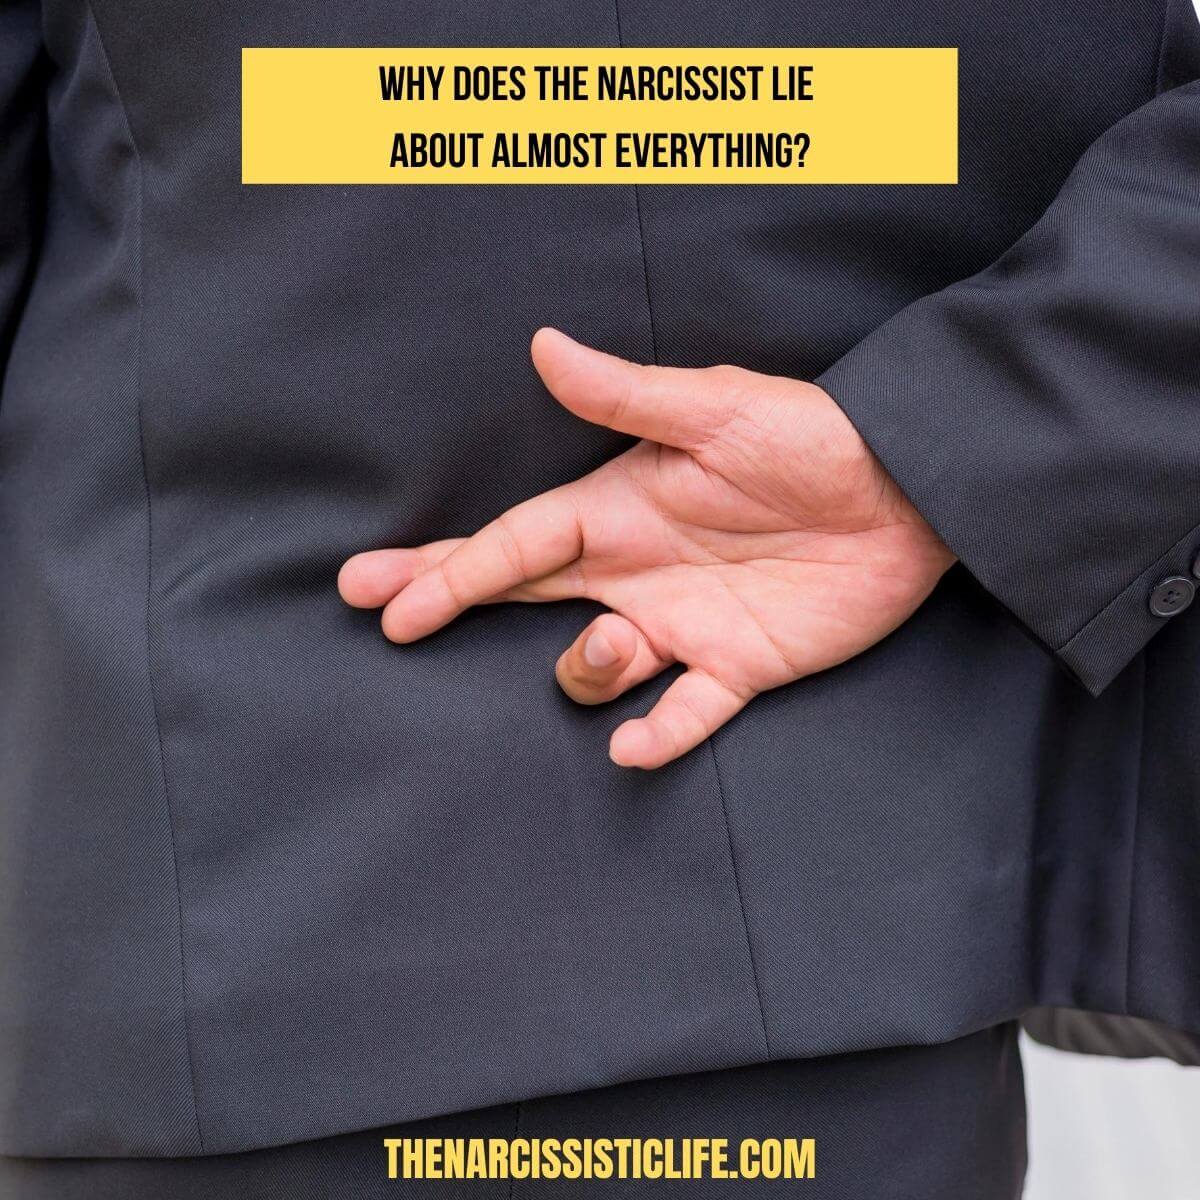 Why Does The Narcissist Lie about Everything?